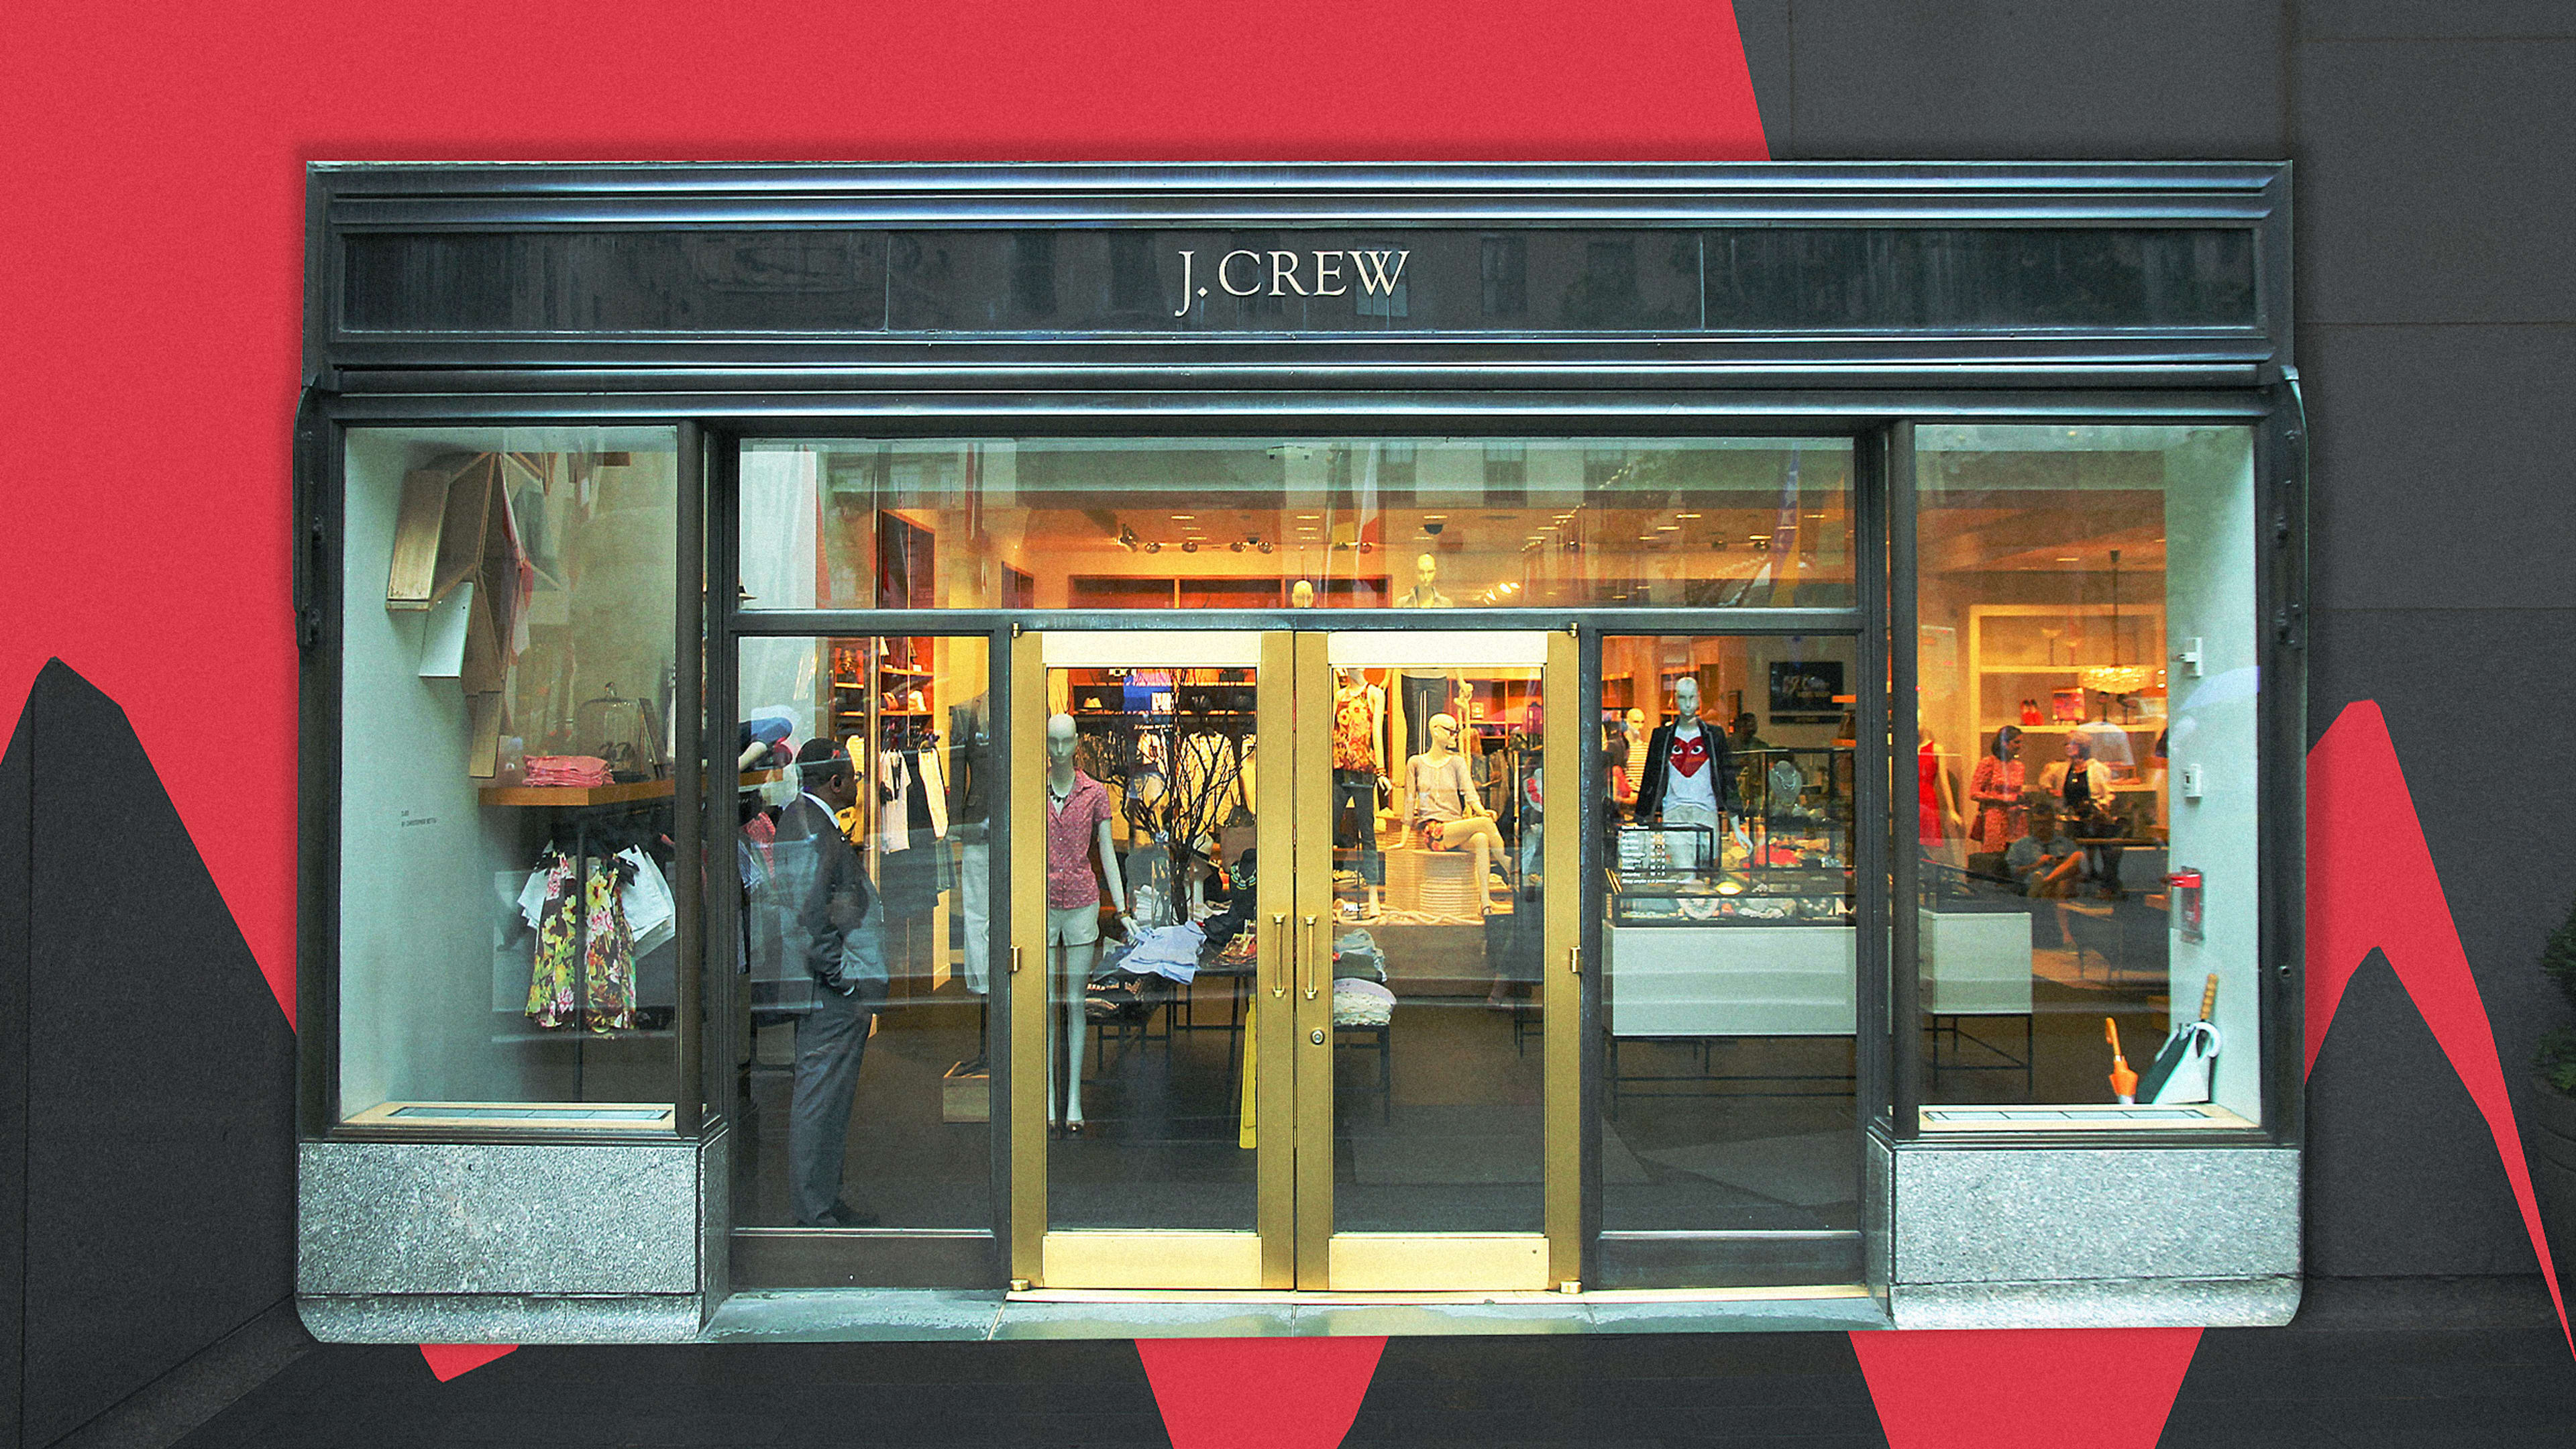 J. Crew files for bankruptcy. What does this mean for Madewell?